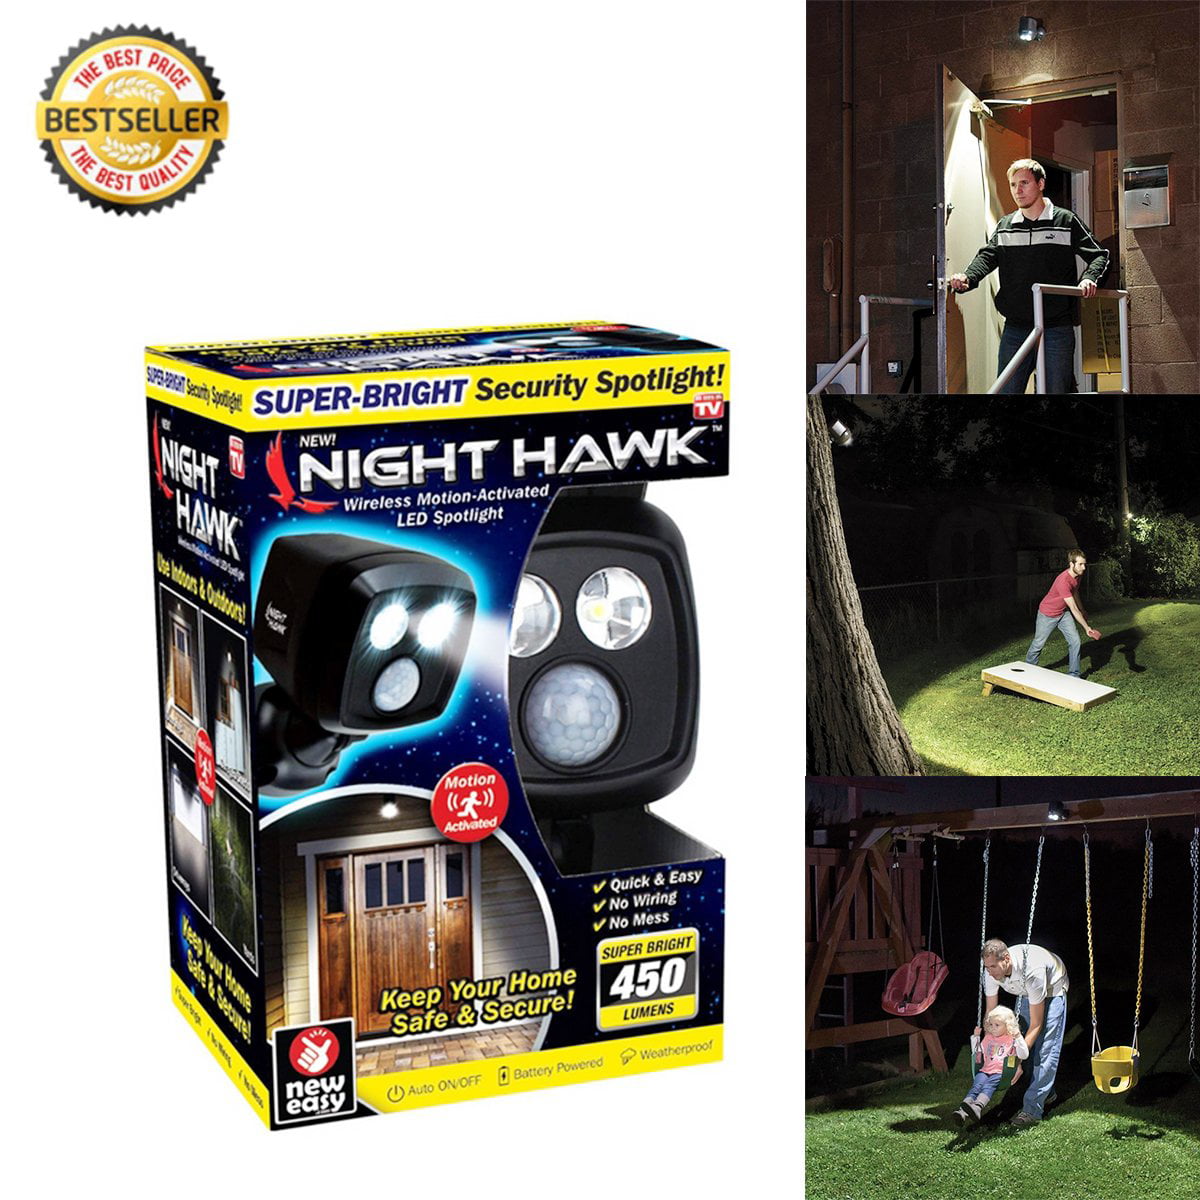 Wireless Motion-Activated LED Superbright Night Hawk Security Spotlight